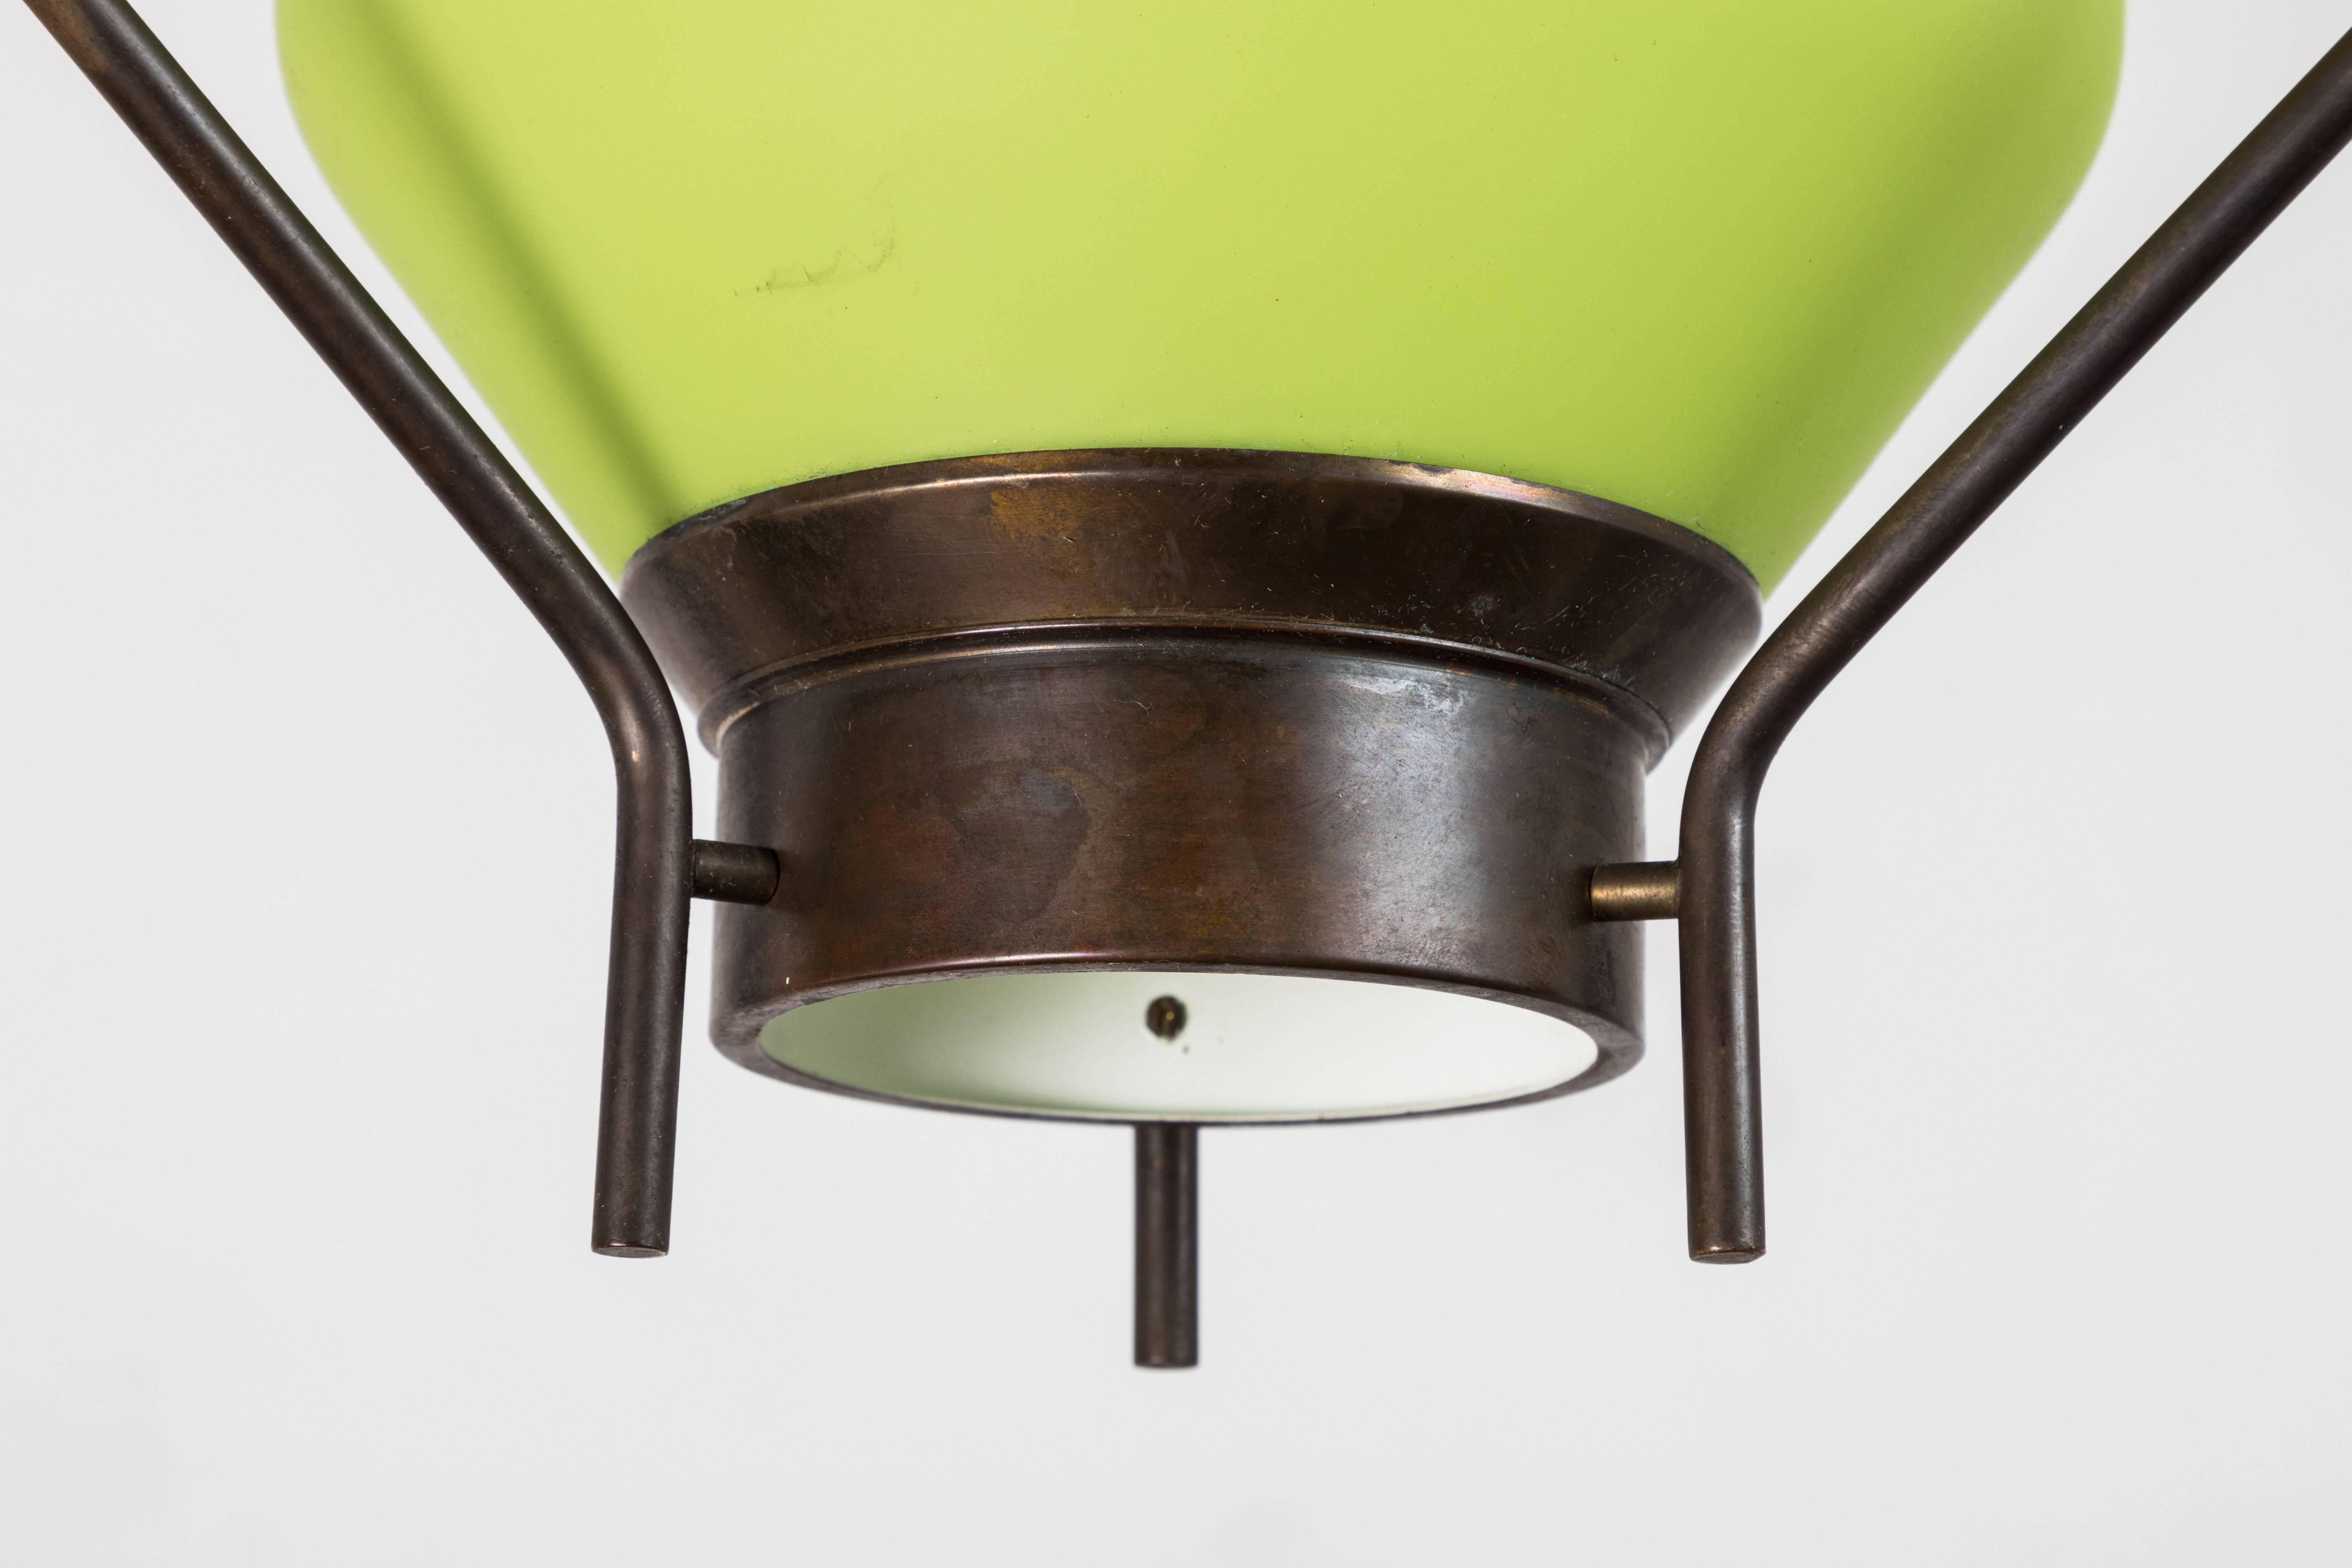 Midcentury Green Glass Pendant In Excellent Condition For Sale In Los Angeles, CA